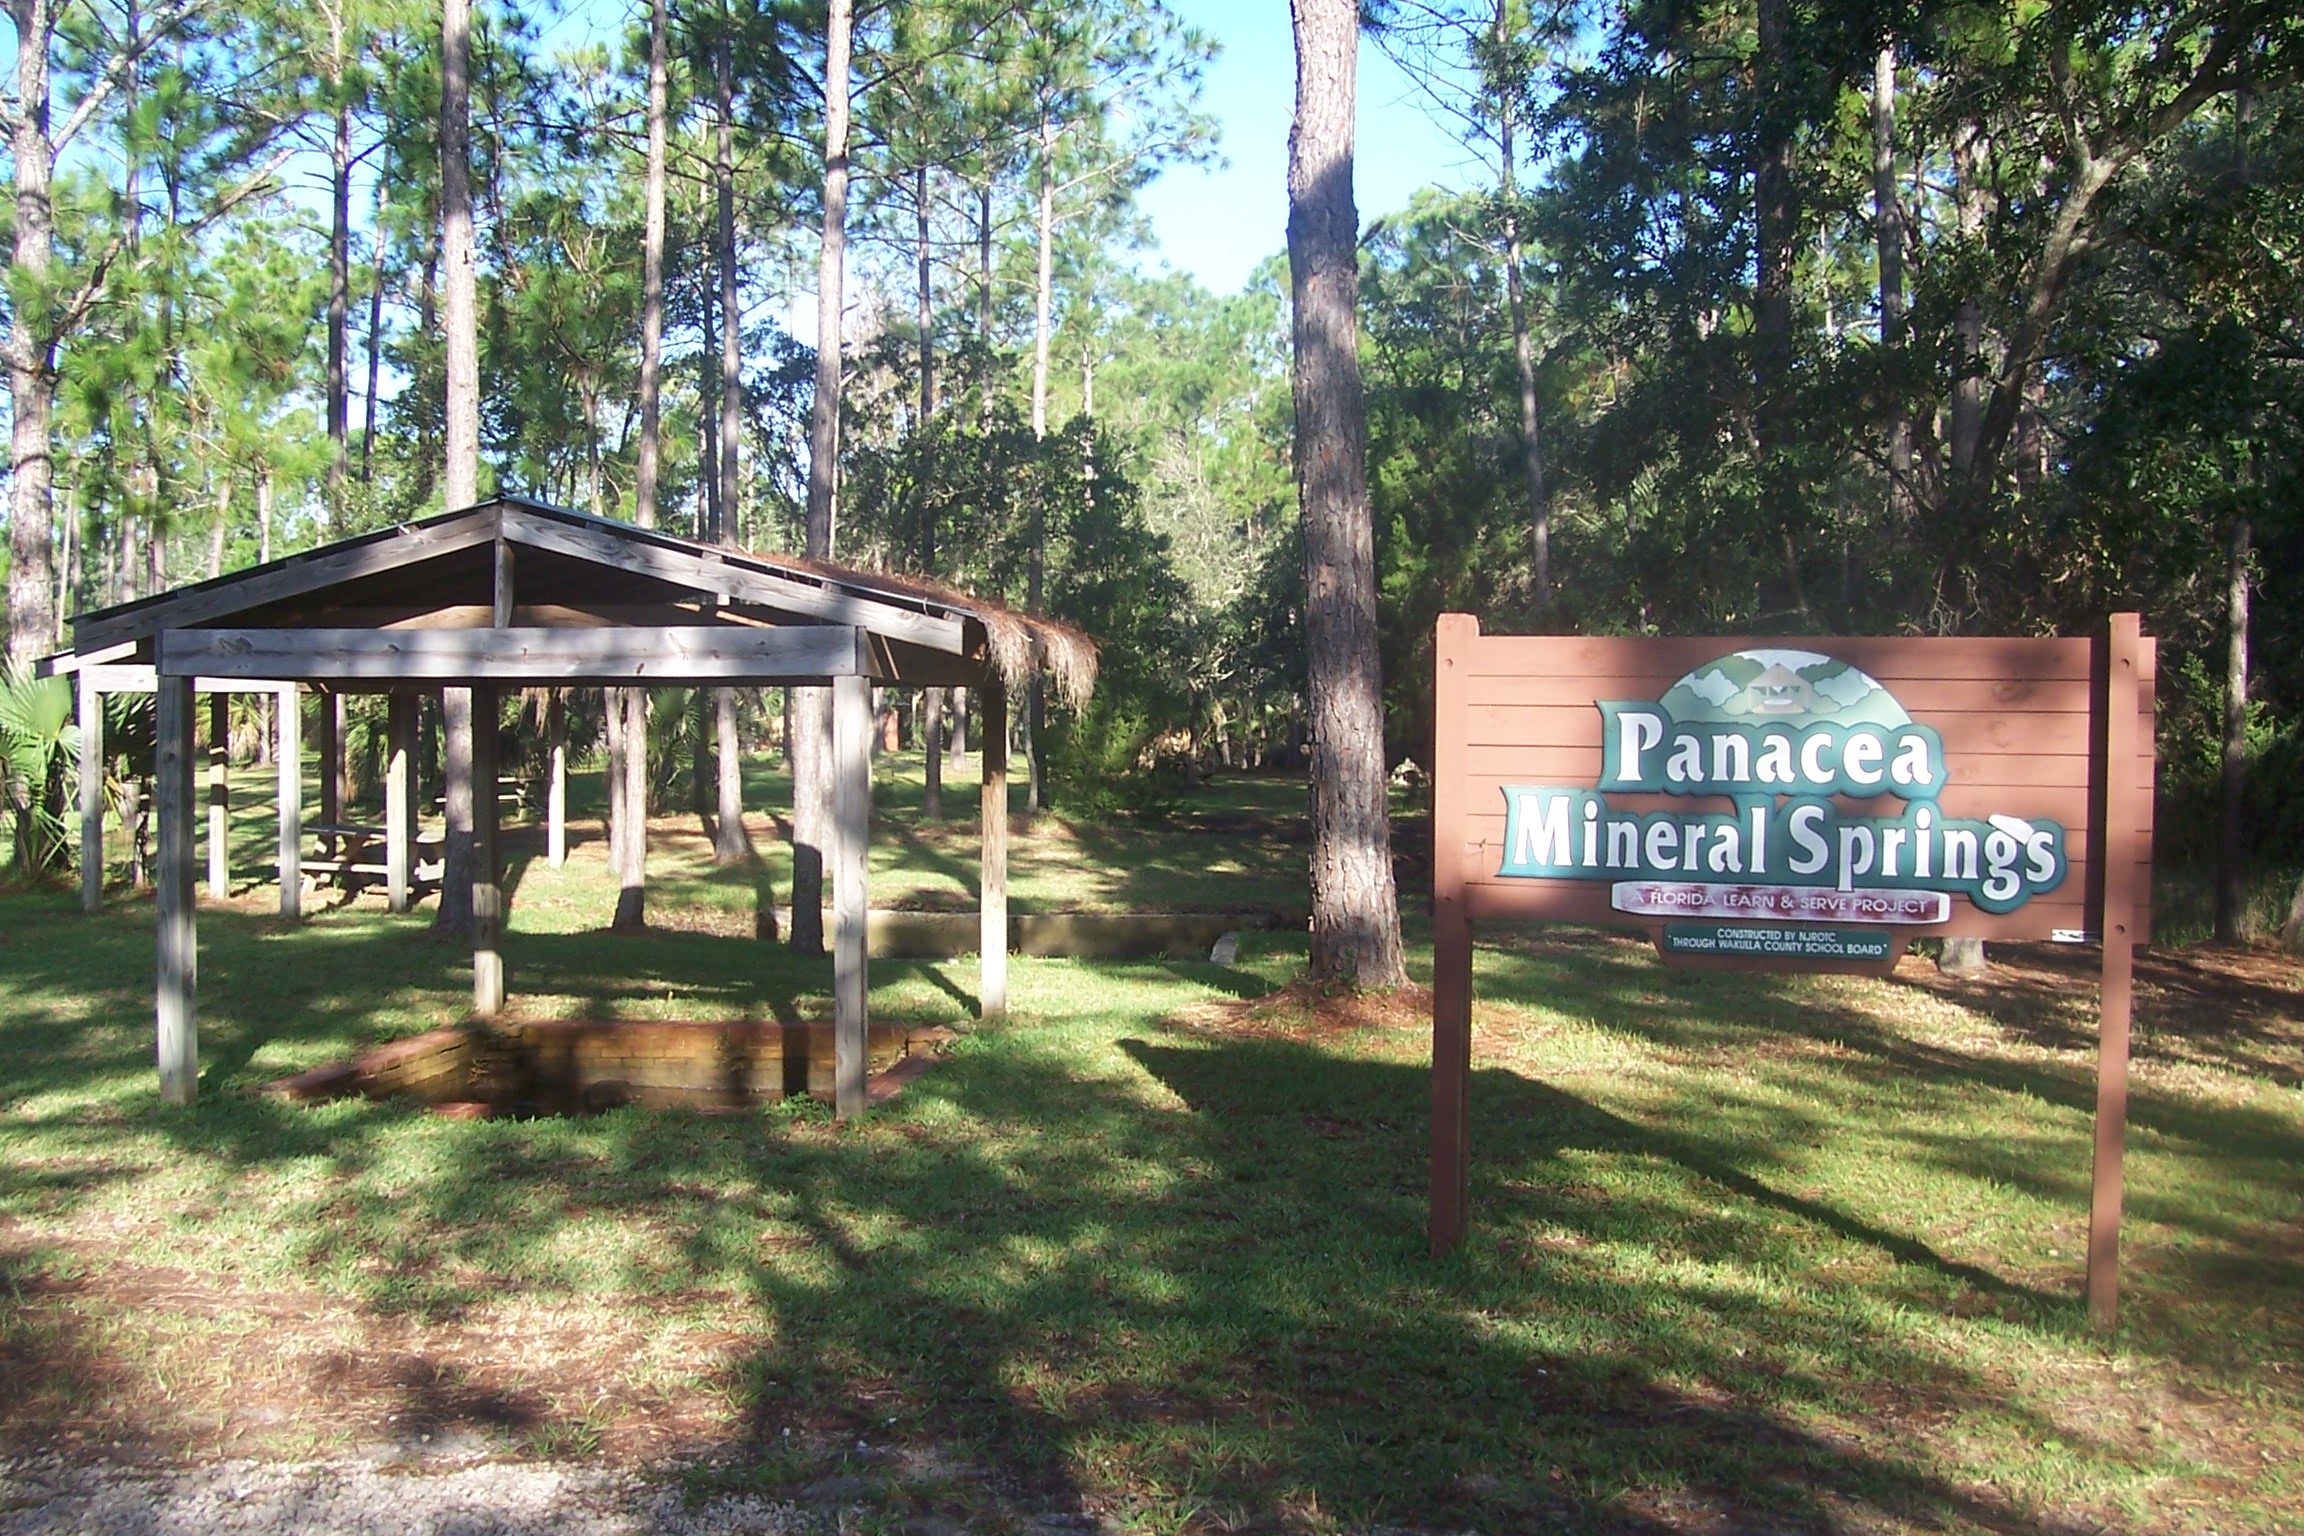 the entrance to a wooded park with signage for kanbea, michael sings